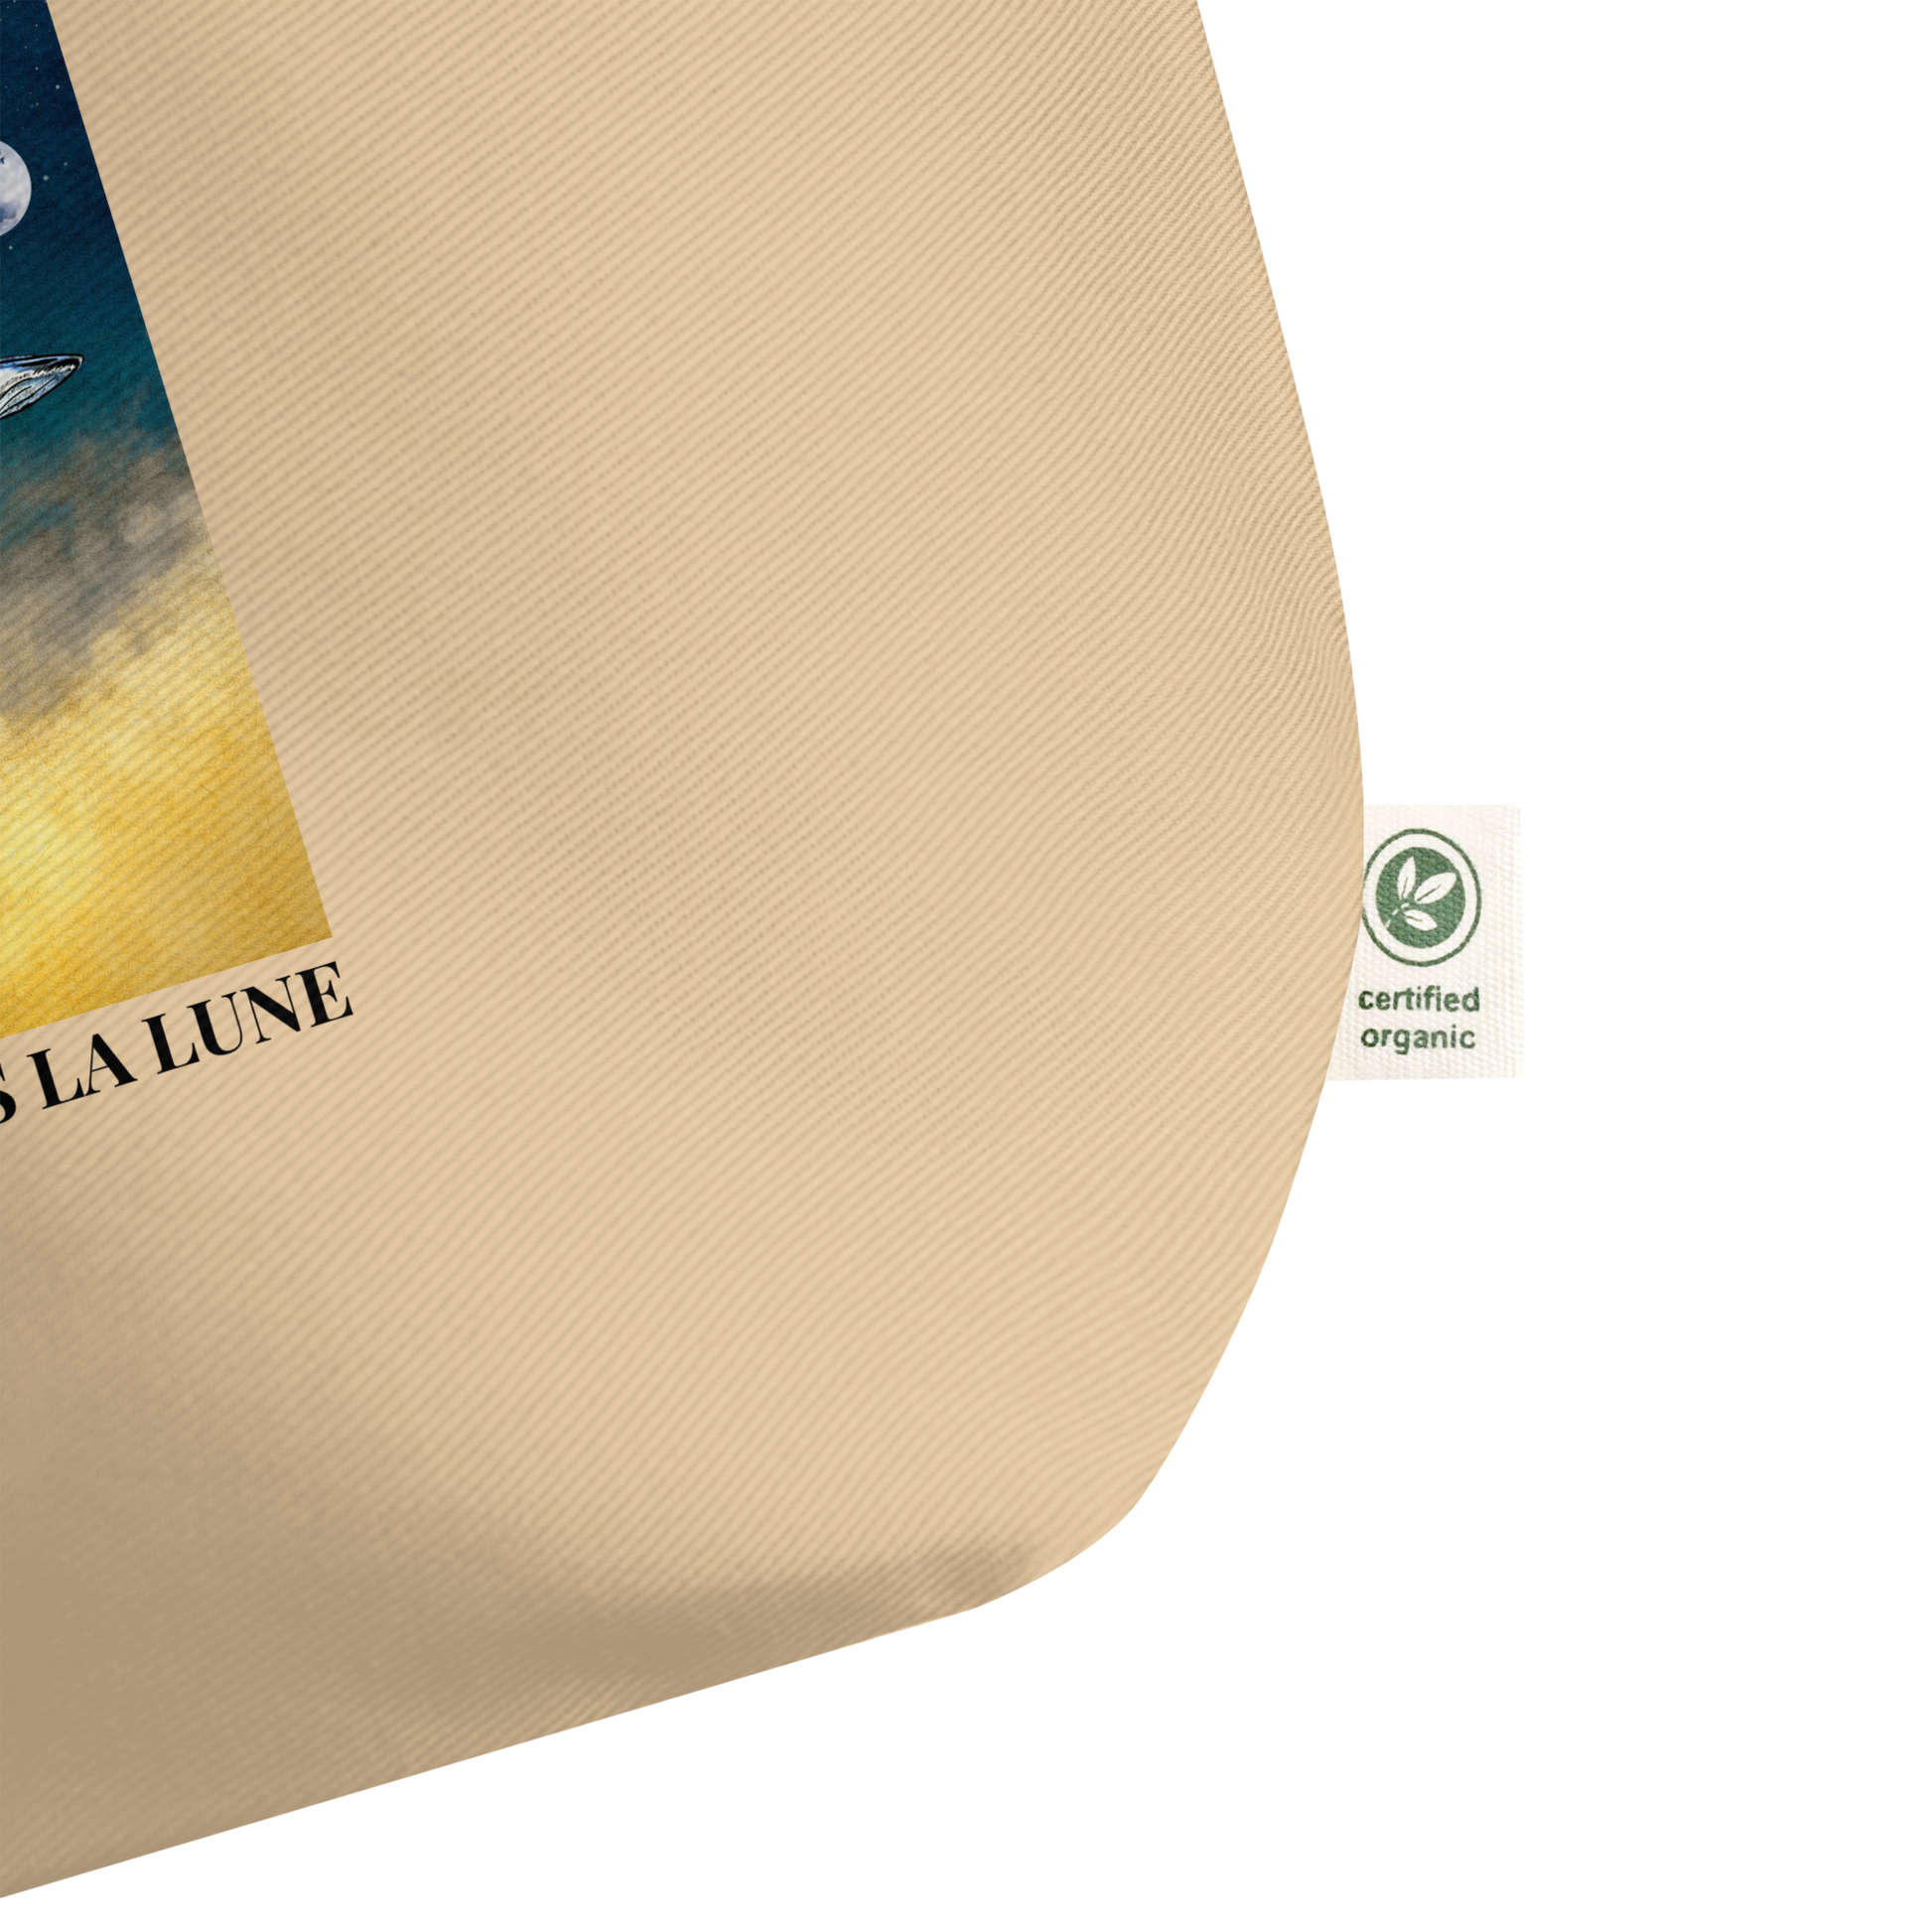 Product Details of a Oyster Colored Whale Eco Tote Bag featuring a majestic Whale Under The Moon graphic - Shop Large Organic Cotton Tote Bags Online - Boozy Fox